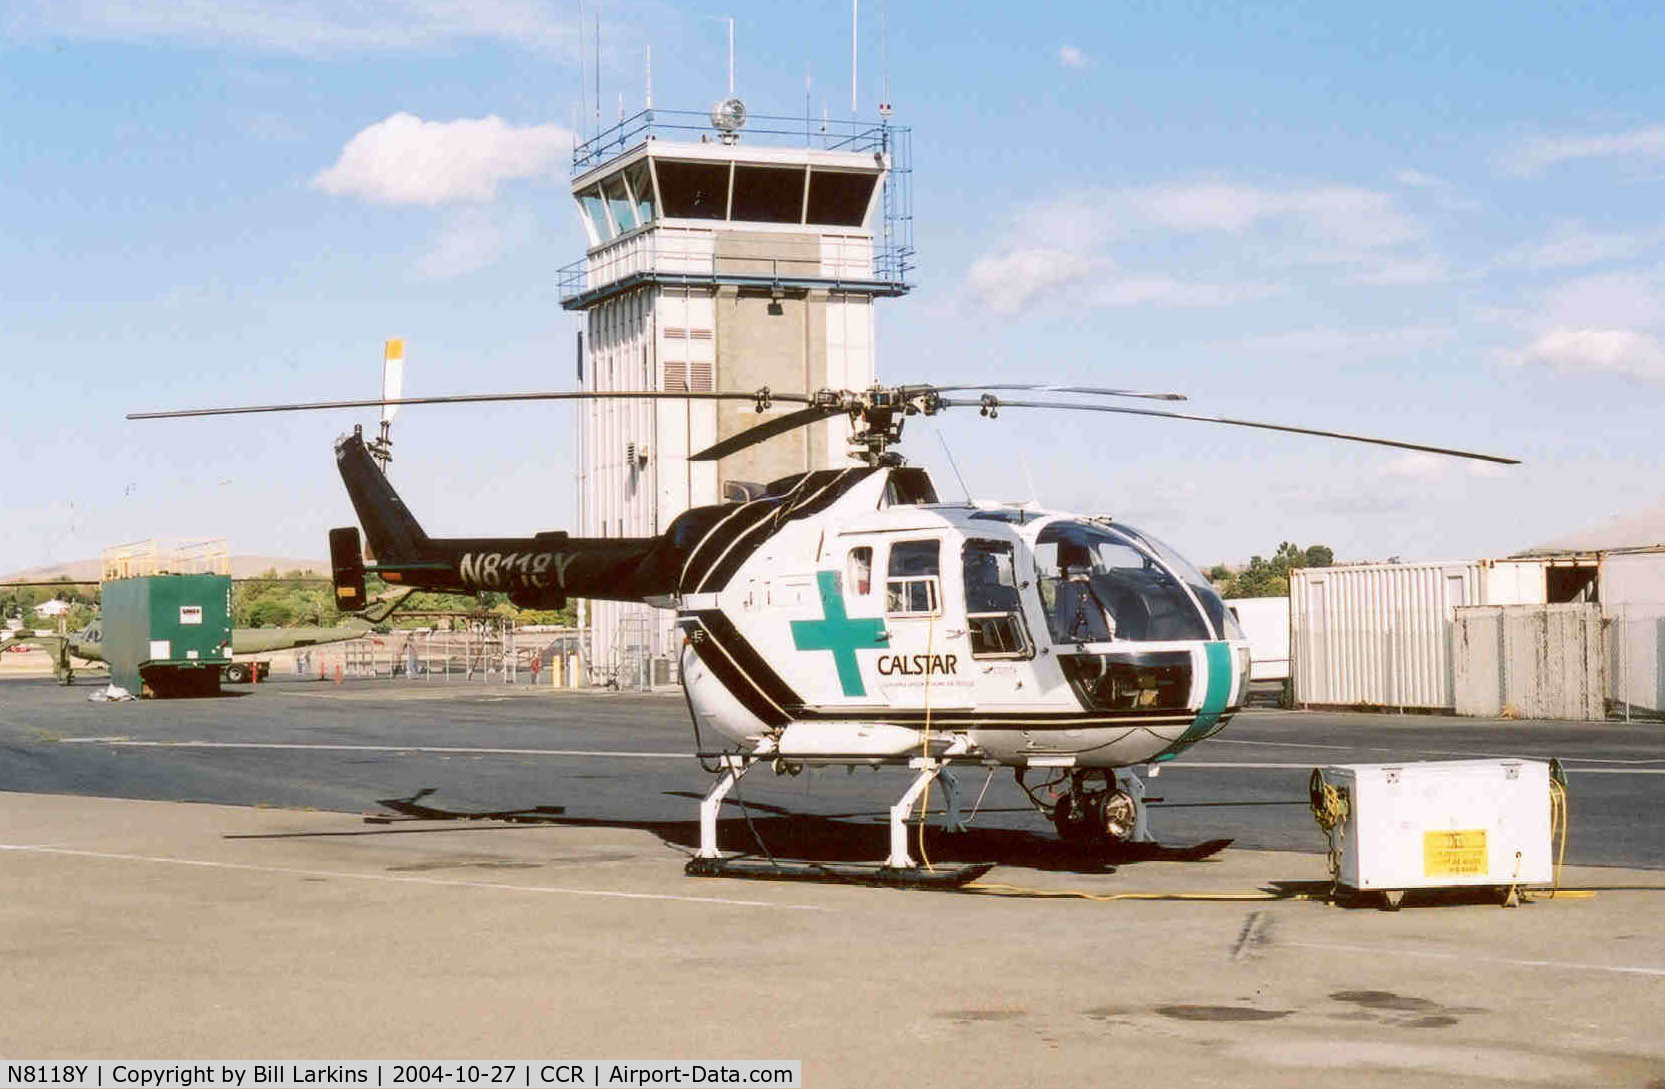 N8118Y, 1989 MBB Bo-105LS-A3 C/N 2017, Calstar medivac helicopter and Control Tower CCR